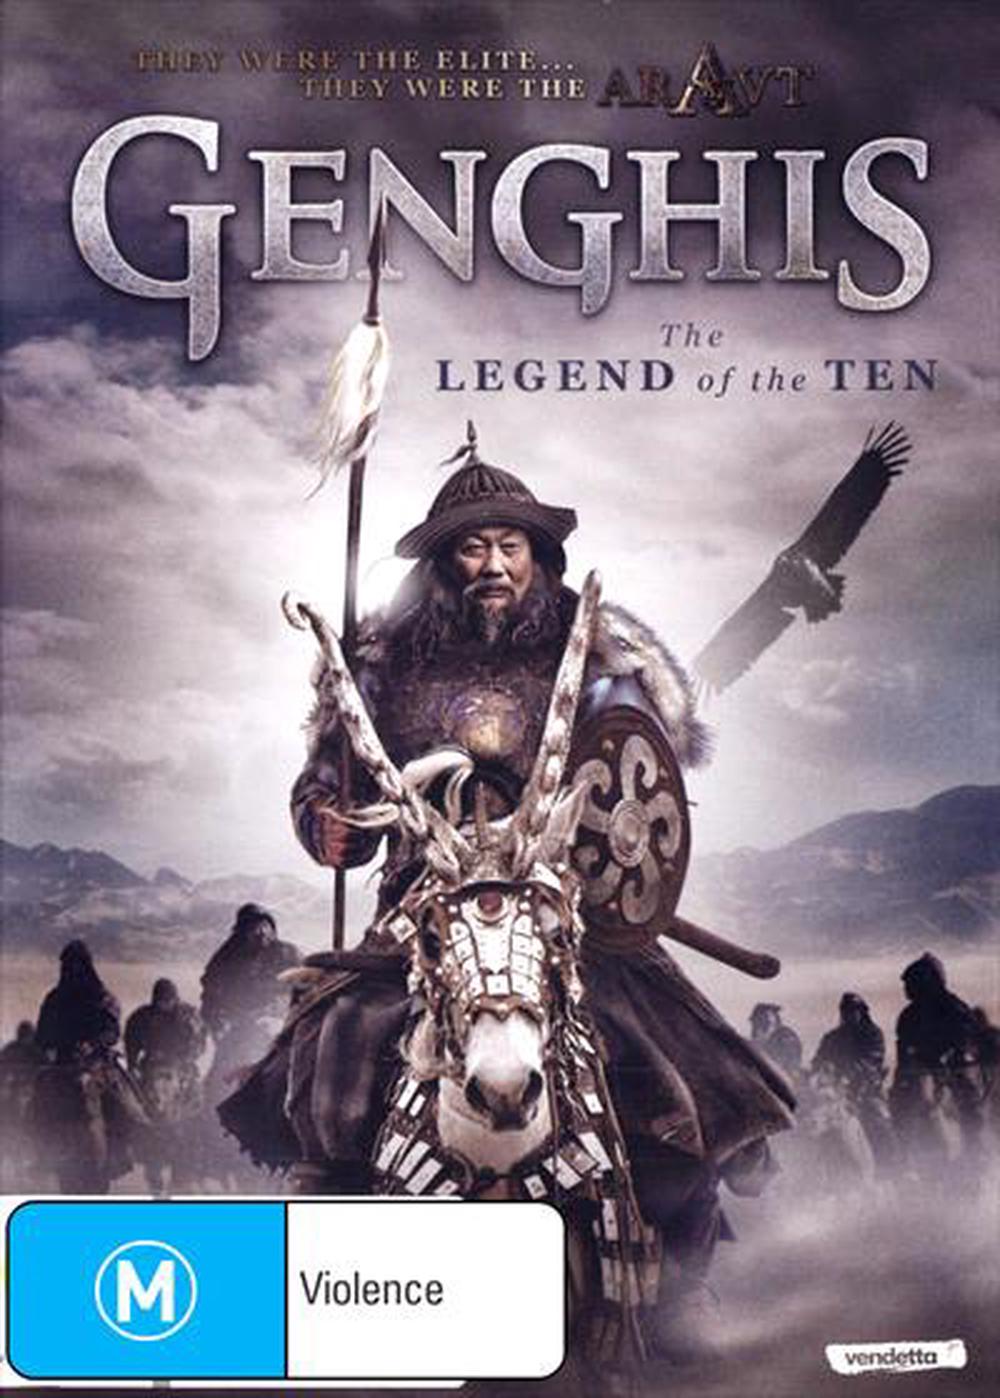 Genghis The Legend of the Ten 2012 Hindi ORG Dual Audio BluRay 300MB Download